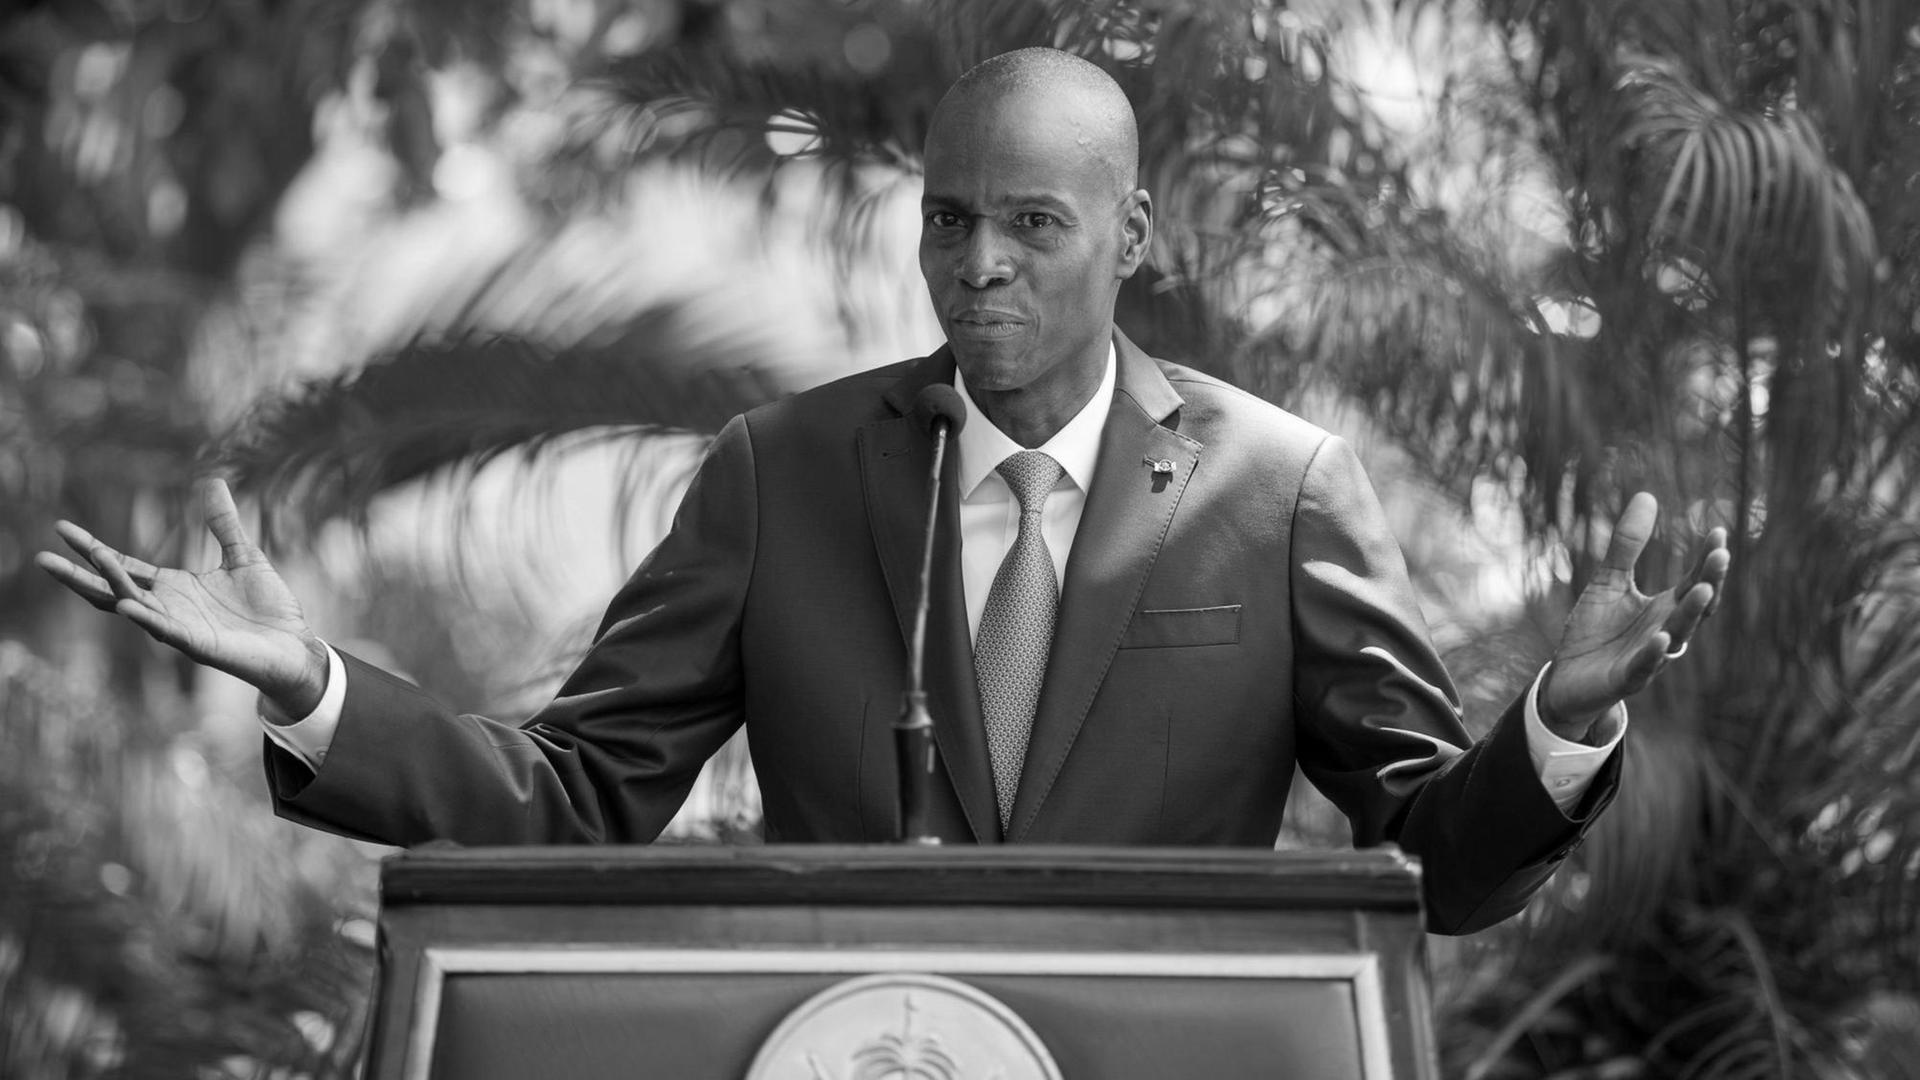 Haitian President Jovenel Moise speaks to the press in the gardens of the National Palace, in Port-au-Prince, Haiti, 15 October 2019. The United Nations officially closed its peace mission in Haiti on Tuesday and made it worried about the serious crisis that the country is going through, with violent protests to demand the departure of President Jovenel Moise. President Moise s proposal is the formation of a Government of national unity, but the opposition demands that the president resign. Statement by Haitian President Jovenel Moise for political crisis in the country ACHTUNG: NUR REDAKTIONELLE NUTZUNG PUBLICATIONxINxGERxSUIxAUTxONLY Copyright: xOrlandoxBarrax AME217 20191015-637067671958011751